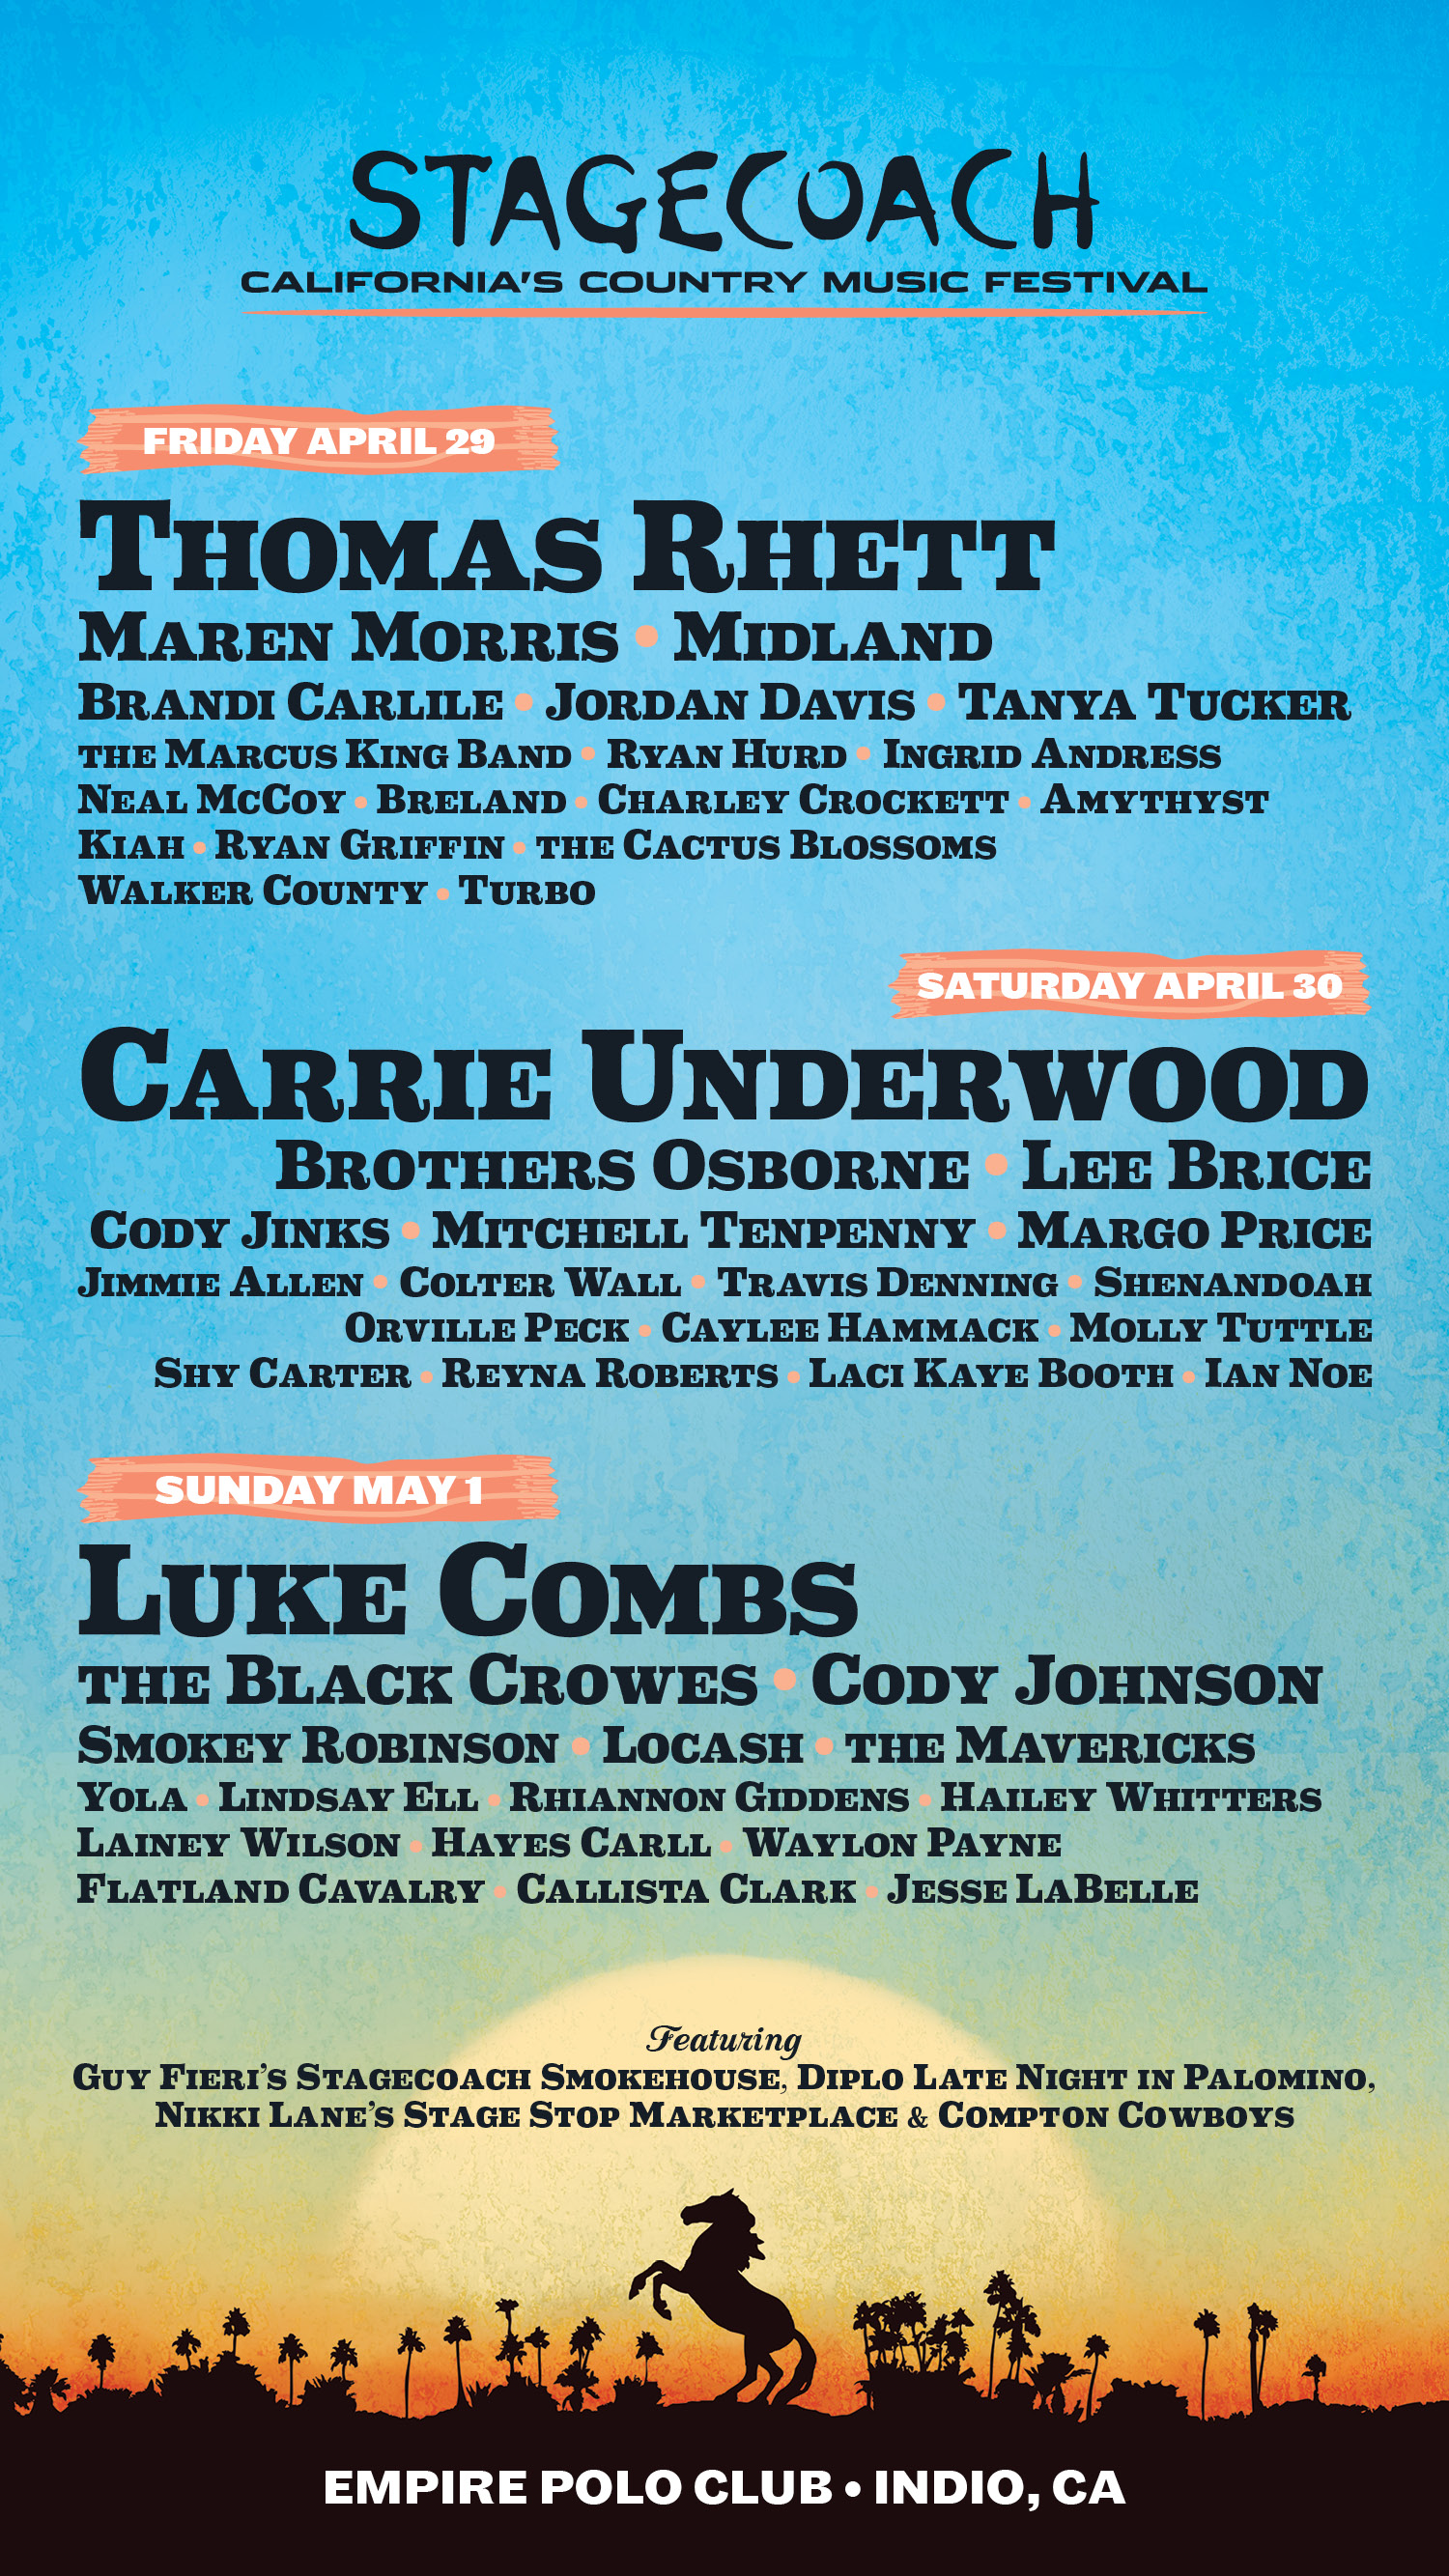 Stagecoach 2022 Lineup Poster